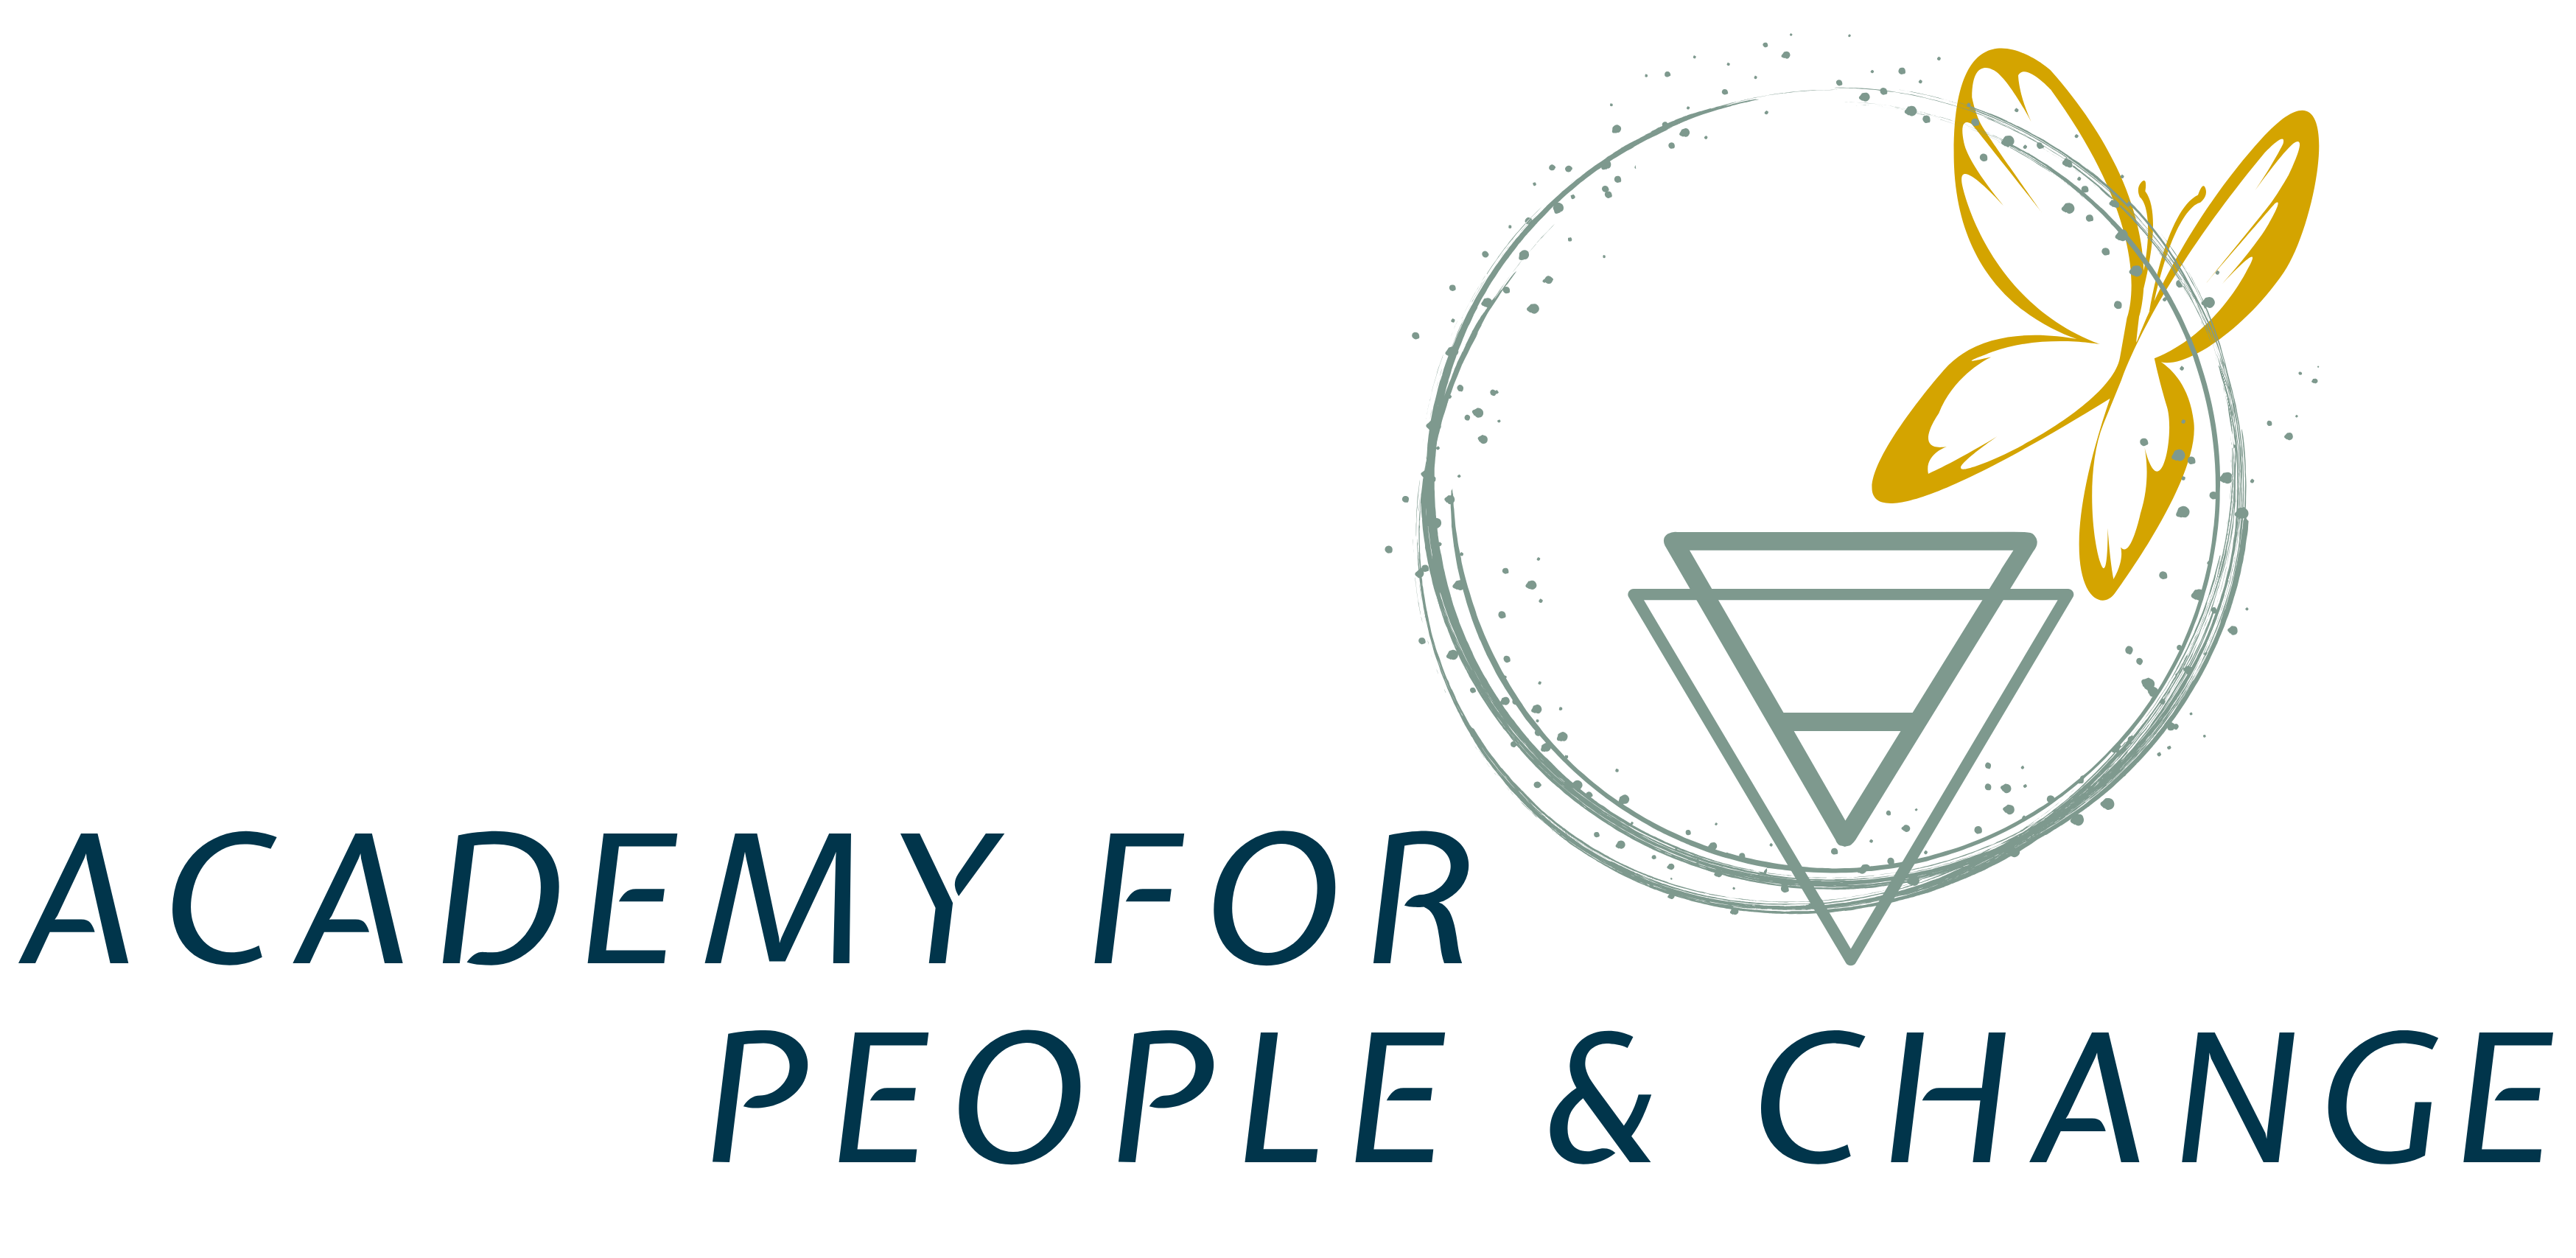 Academy for People & Change